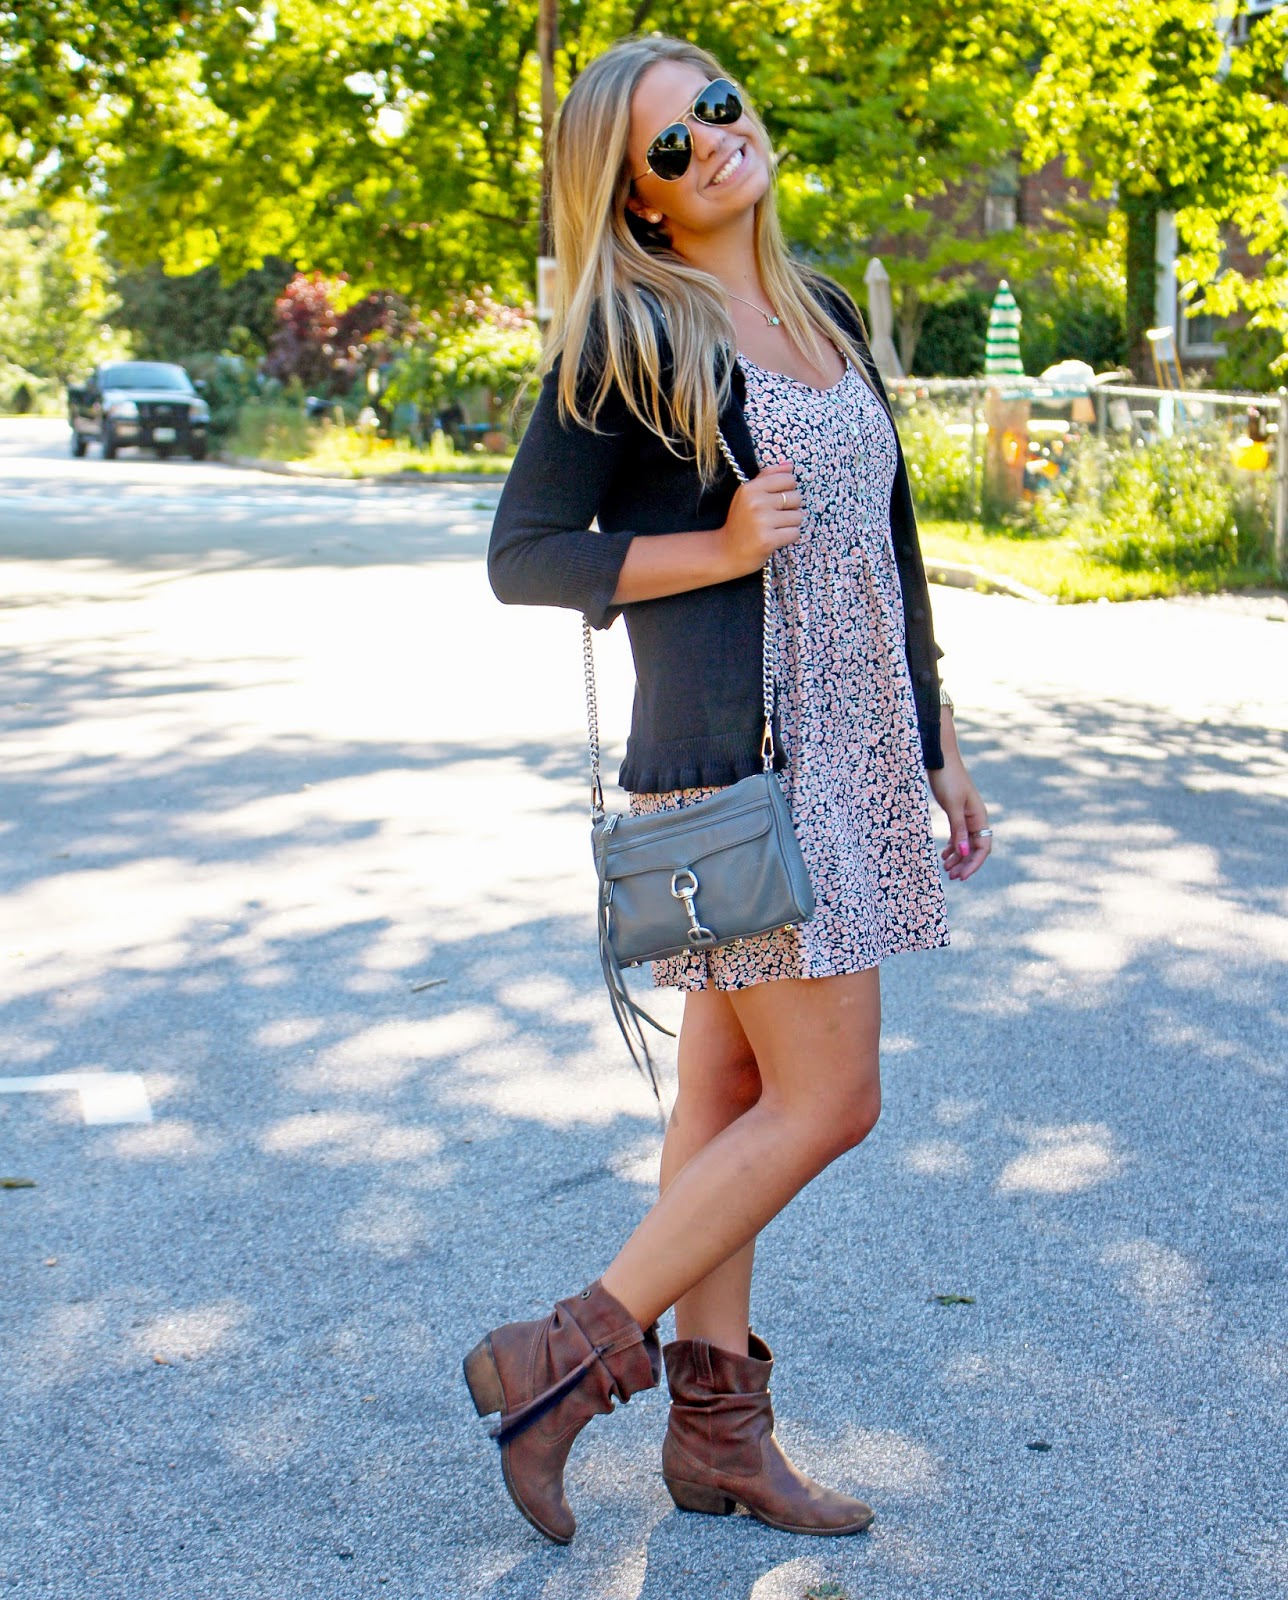 Style Cubby - Fashion and Lifestyle Blog Based in New England: Breezy ...